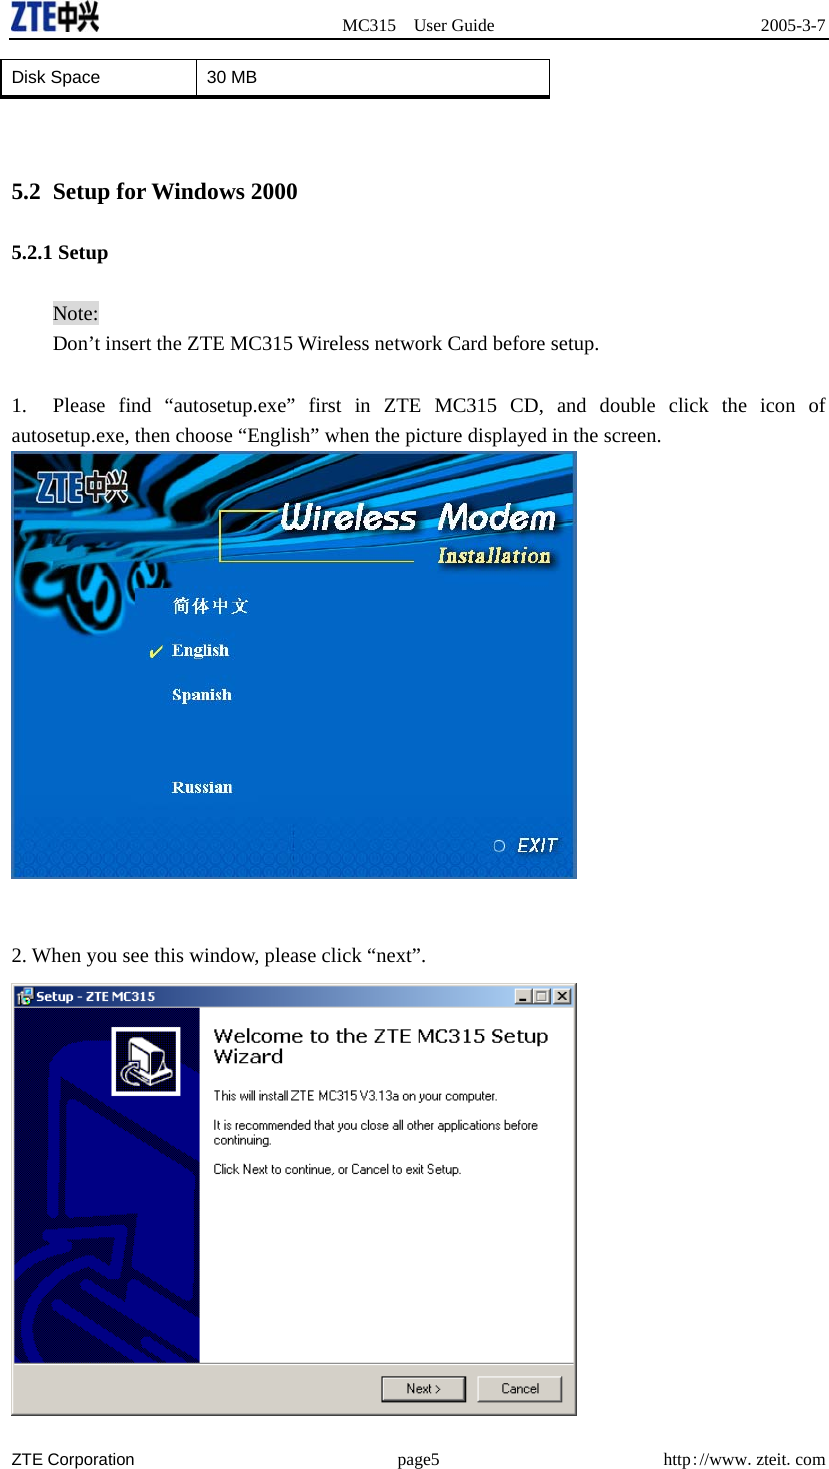  MC315 User Guide  2005-3-7  ZTE Corporation page5 http://www.zteit.com Disk Space    30 MB     5.2 Setup for Windows 2000 5.2.1 Setup Note: Don’t insert the ZTE MC315 Wireless network Card before setup.    1.  Please find “autosetup.exe” first in ZTE MC315 CD, and double click the icon of autosetup.exe, then choose “English” when the picture displayed in the screen.    2. When you see this window, please click “next”.  